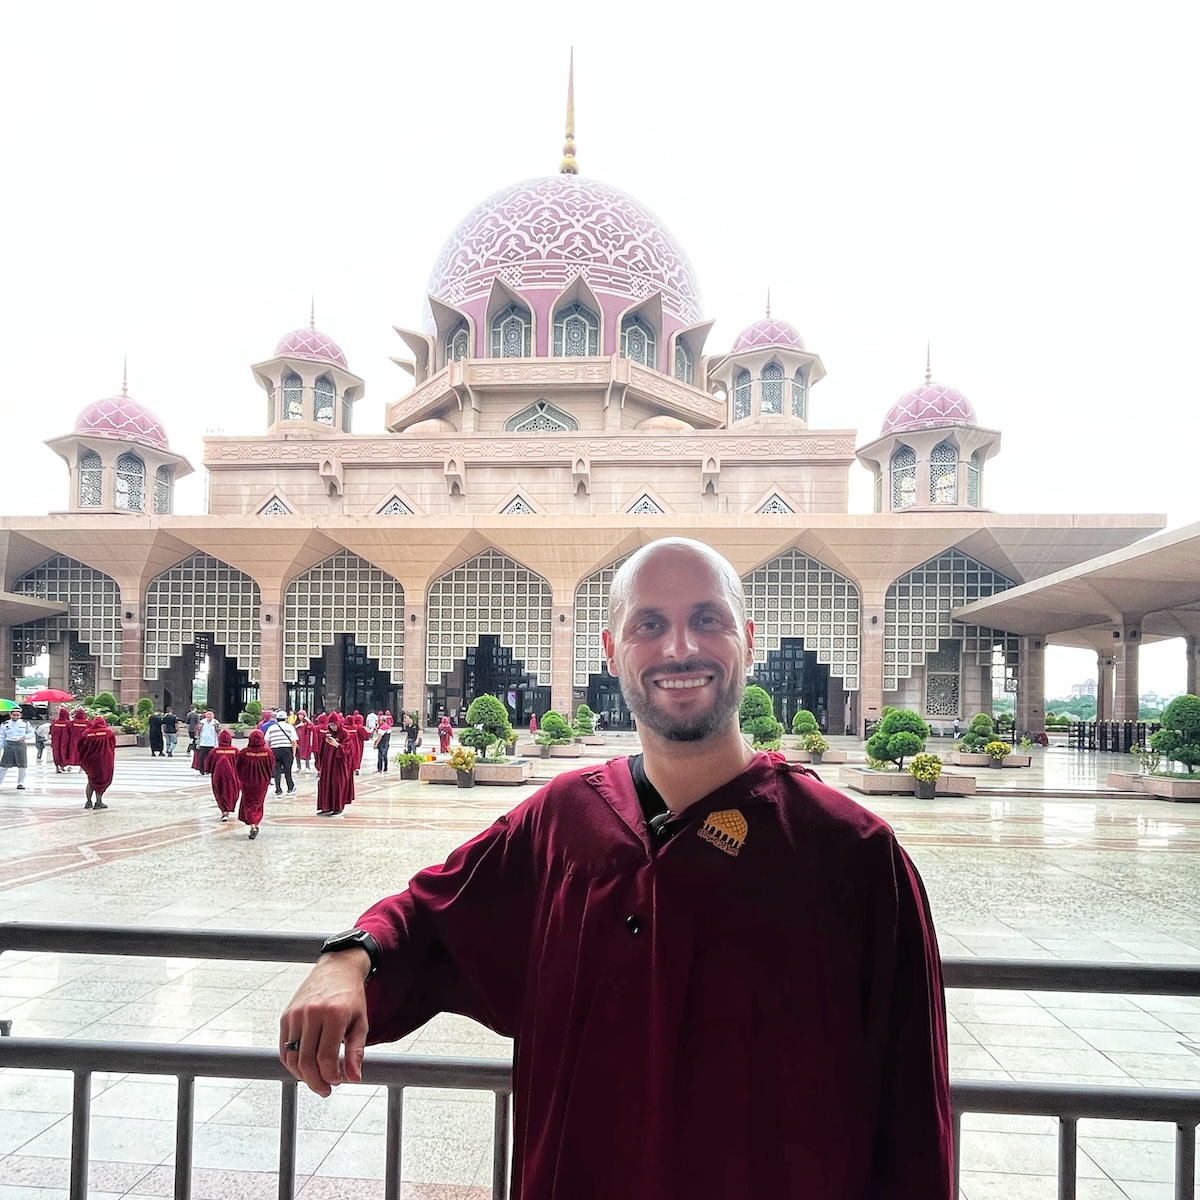 A man wearing a maroon robe standing in front of the Putra Mosque in Putrajaya, Malaysia, with its distinctive pink domes and intricate architectural design. Other visitors in similar robes can be seen in the background, highlighting the mosque's grandeur and cultural significance.